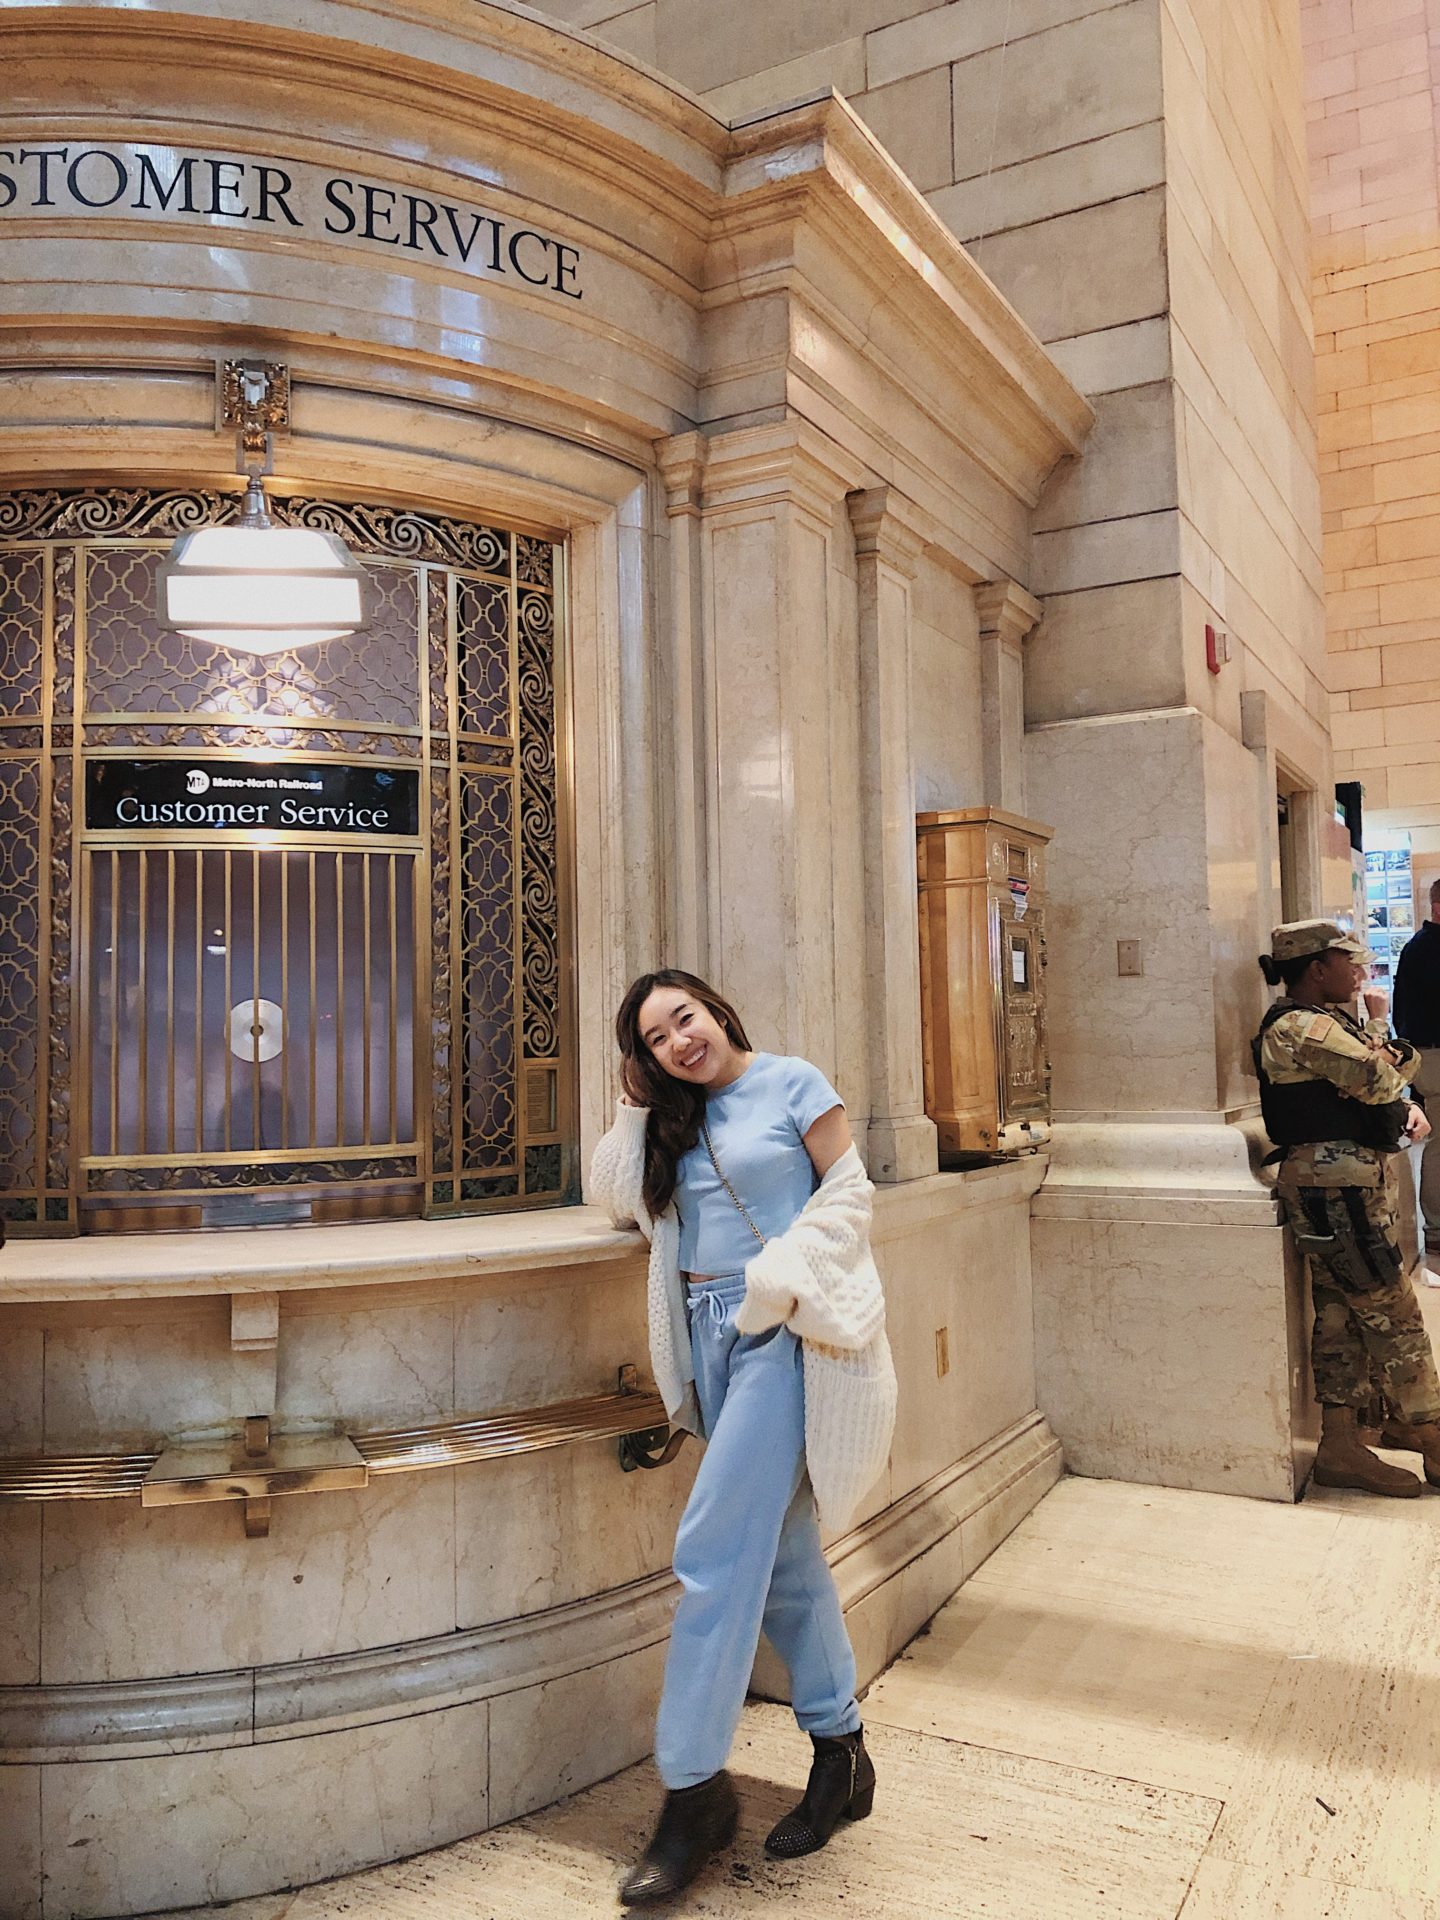 Customer service booth in Grand Central Station in New York City